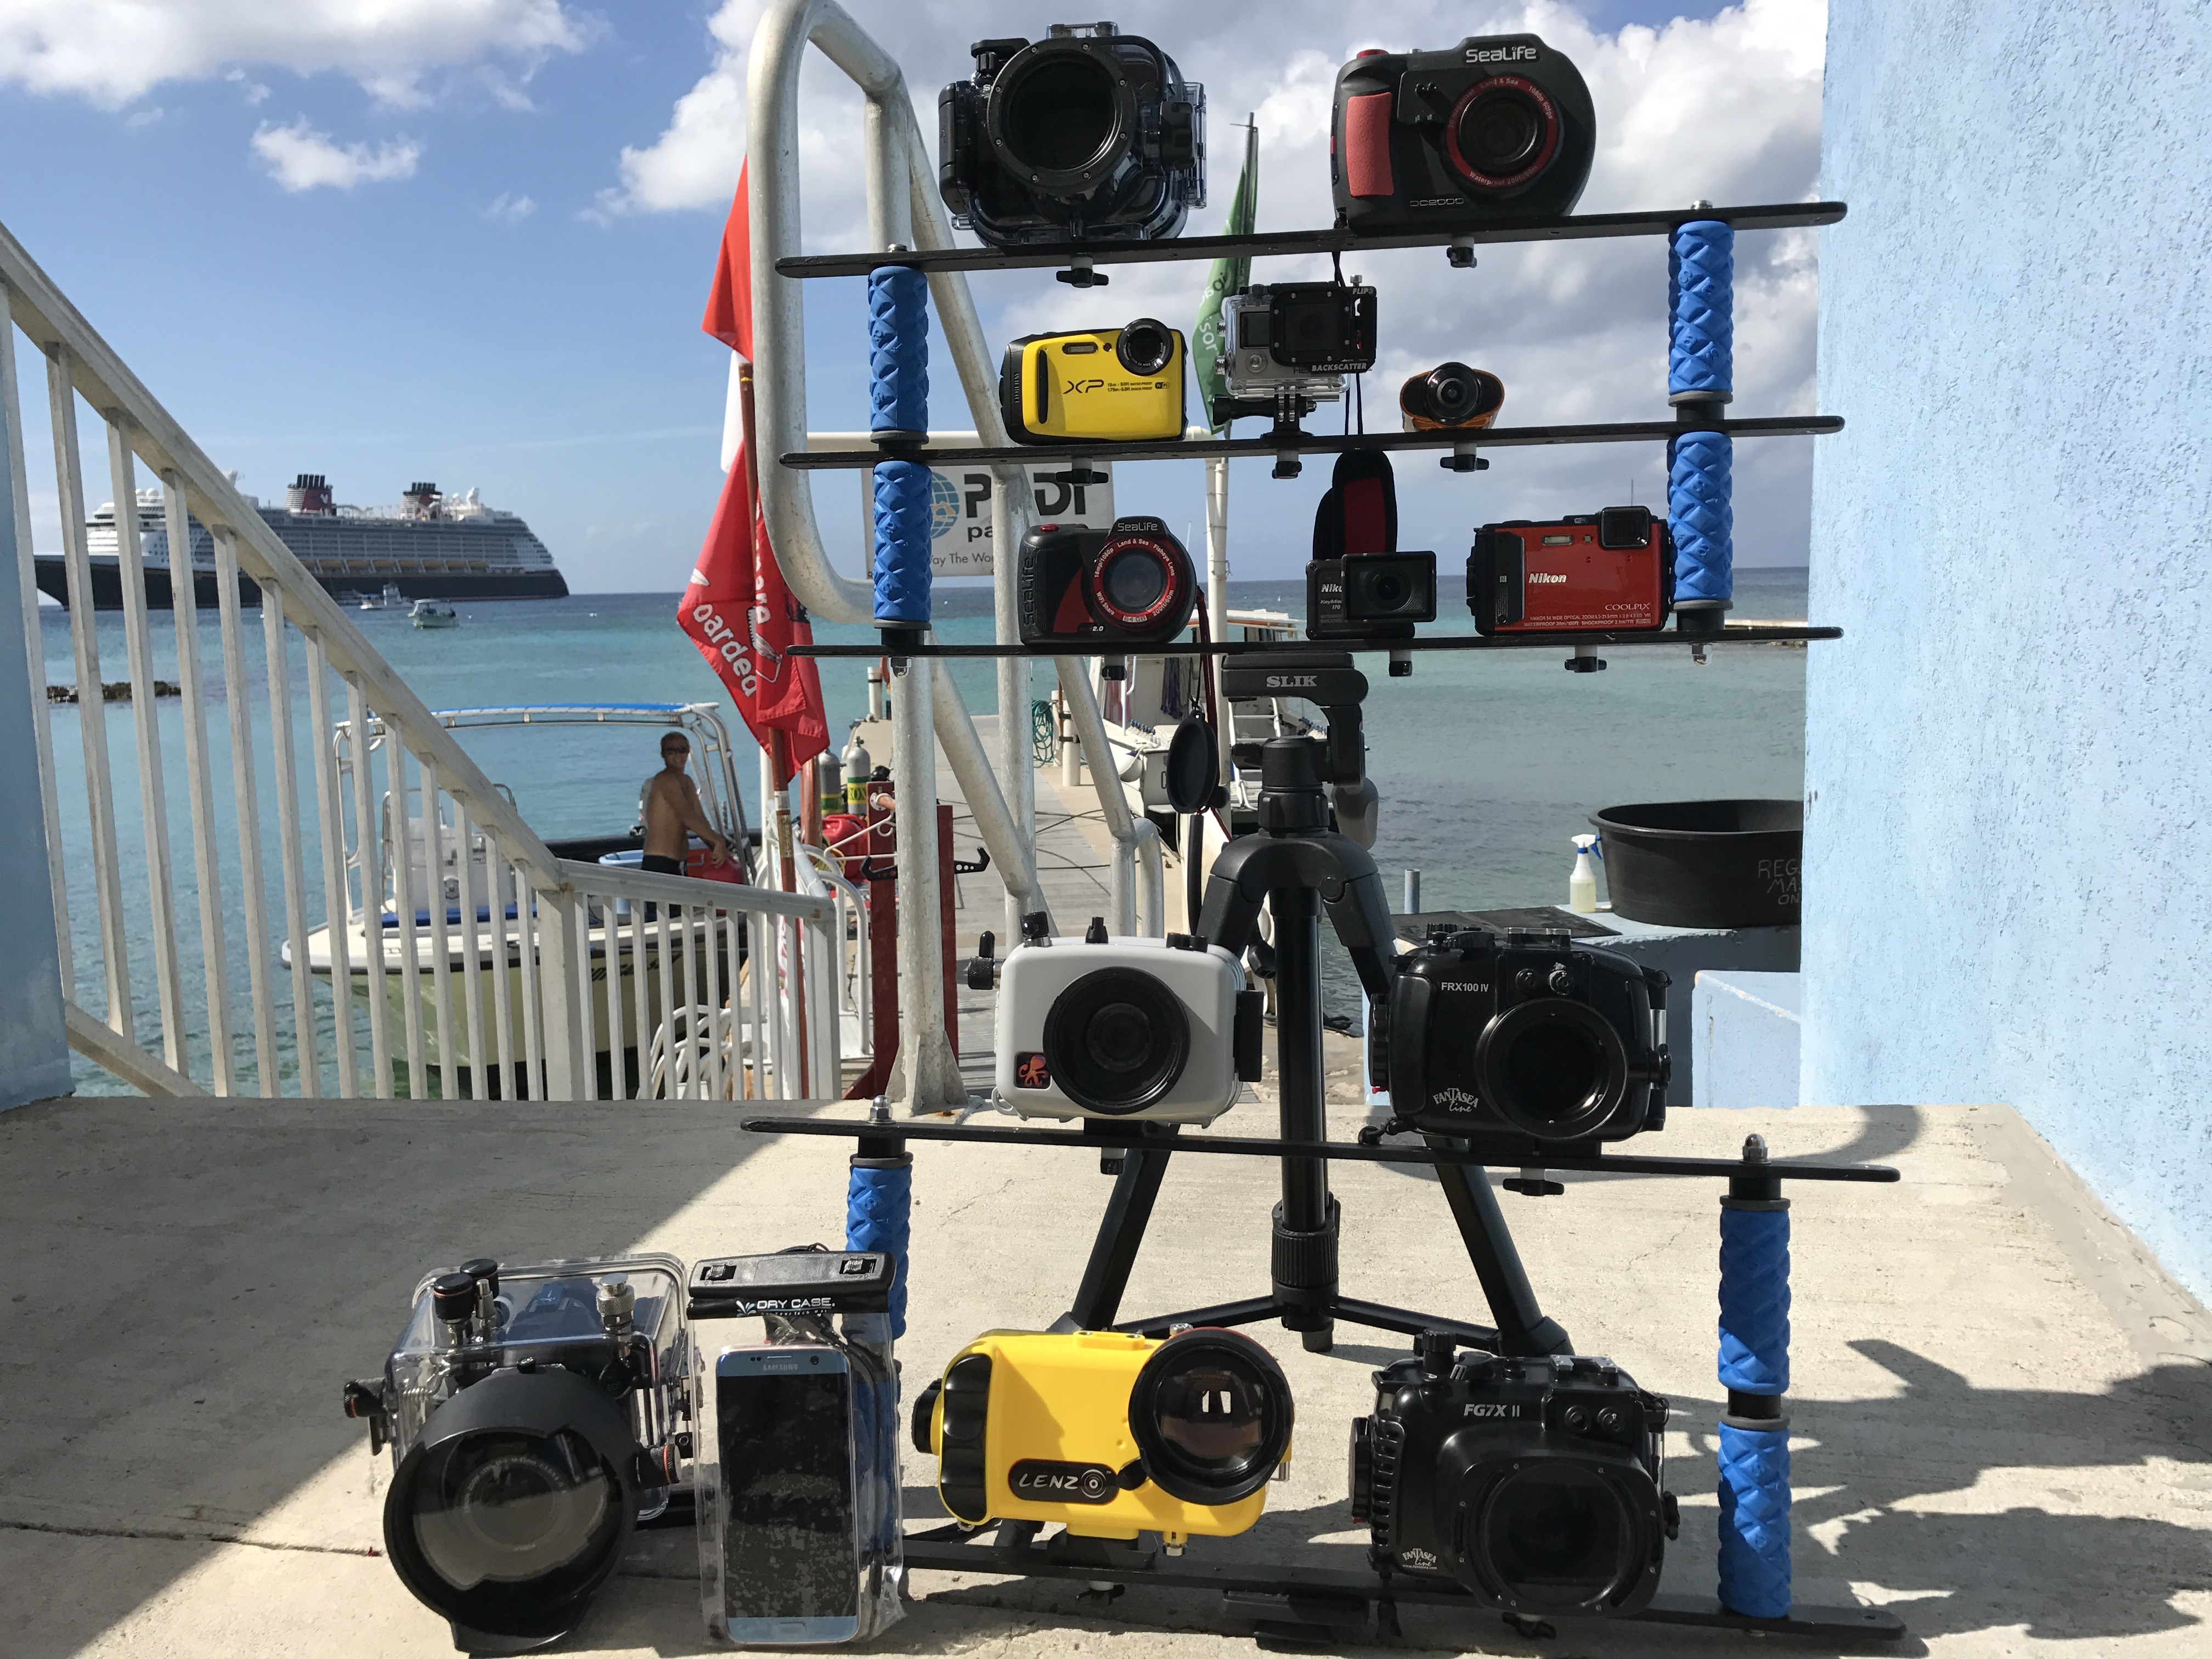 Apparatus to take the same photos from all cameras